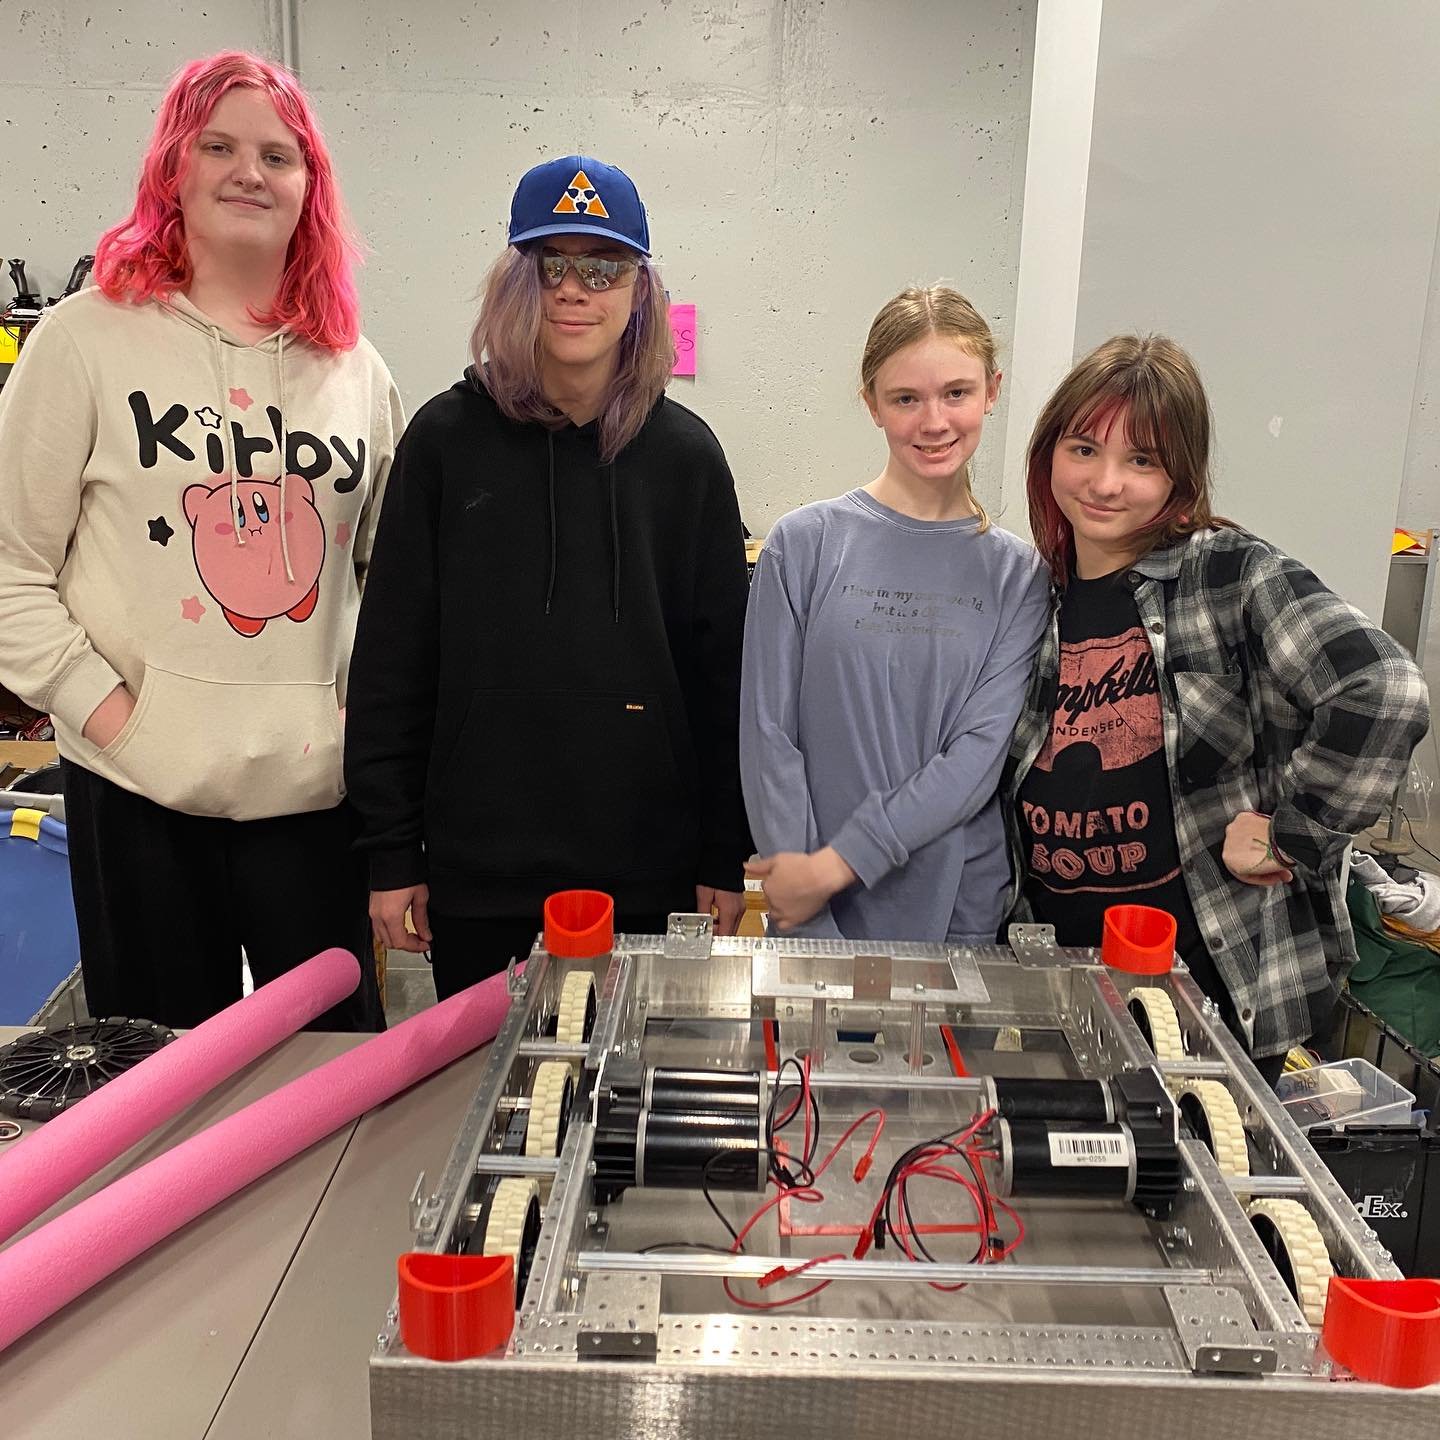 Three Girls on Fire students and one Triple Strange student working on a robot base that is about 3 feet by 3 feet in size